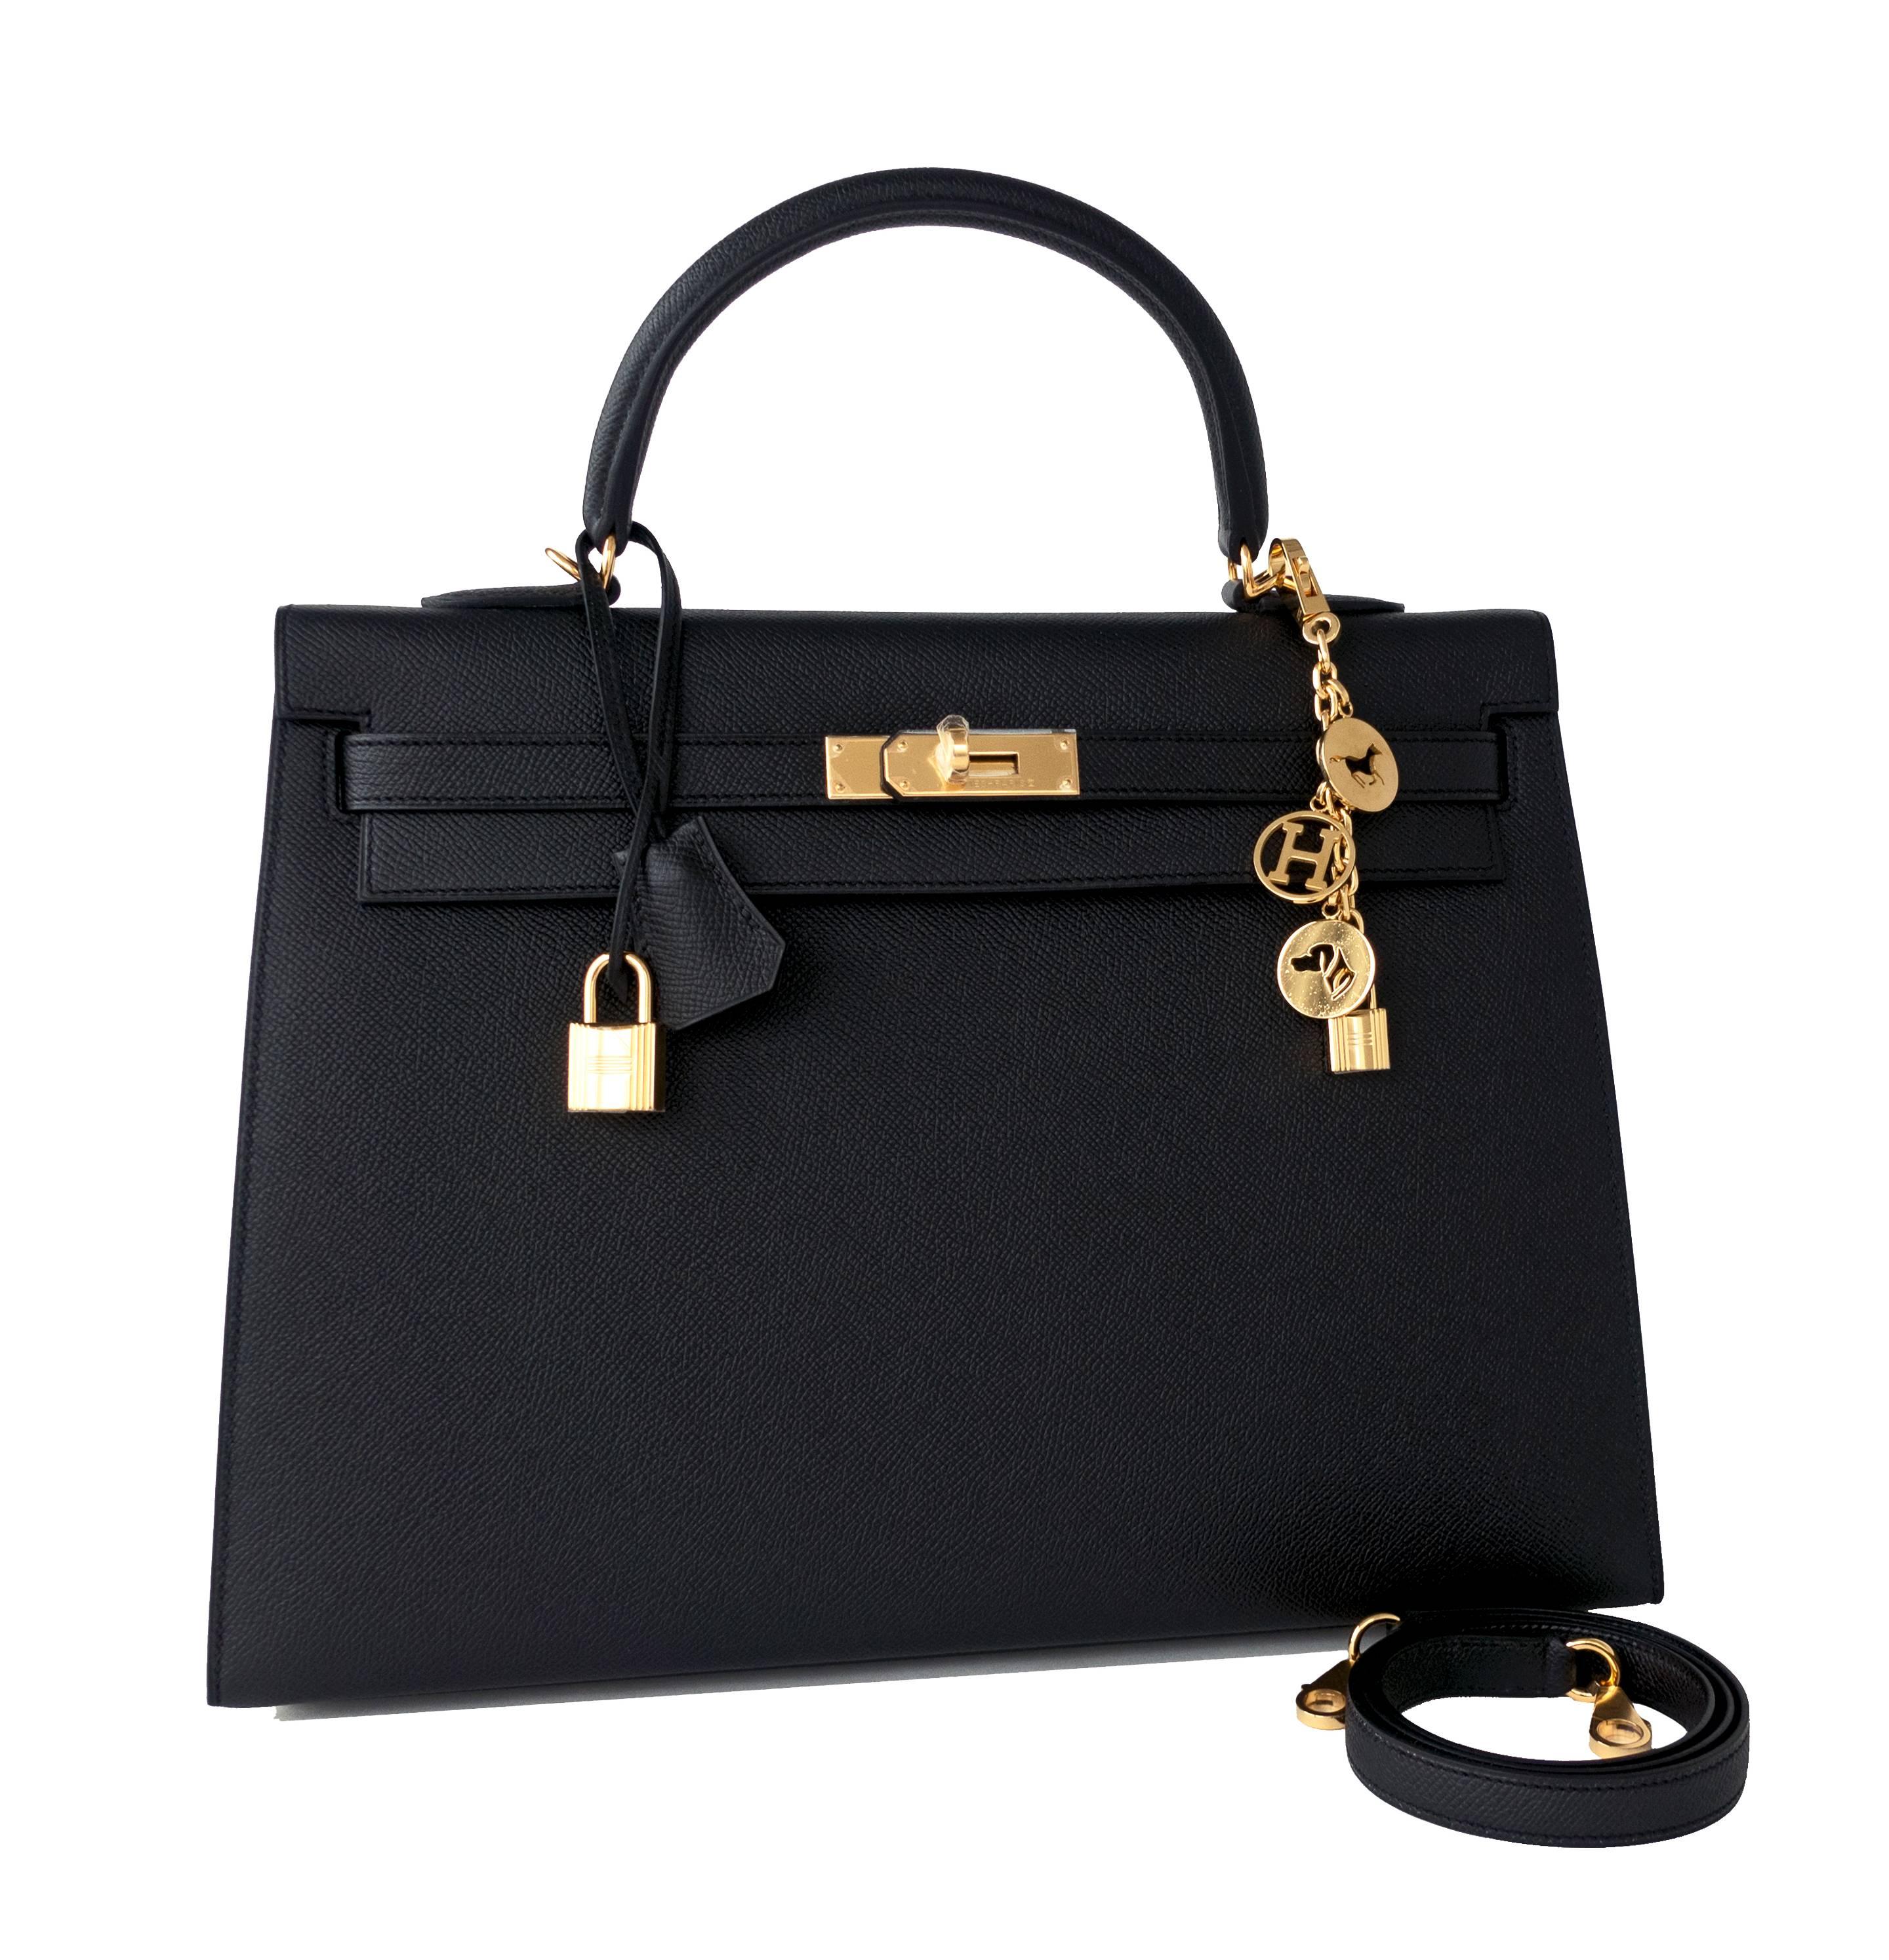 Hermes Black Epsom Sellier Kelly 35cm Gold Hardware X Stamp Superb
Brand New in Box.  Pristine Condition (with plastic on hardware).  2016 store fresh bag with interior X Stamp.
Perfect gift!  Comes full set with keys, lock, clochette, shoulder